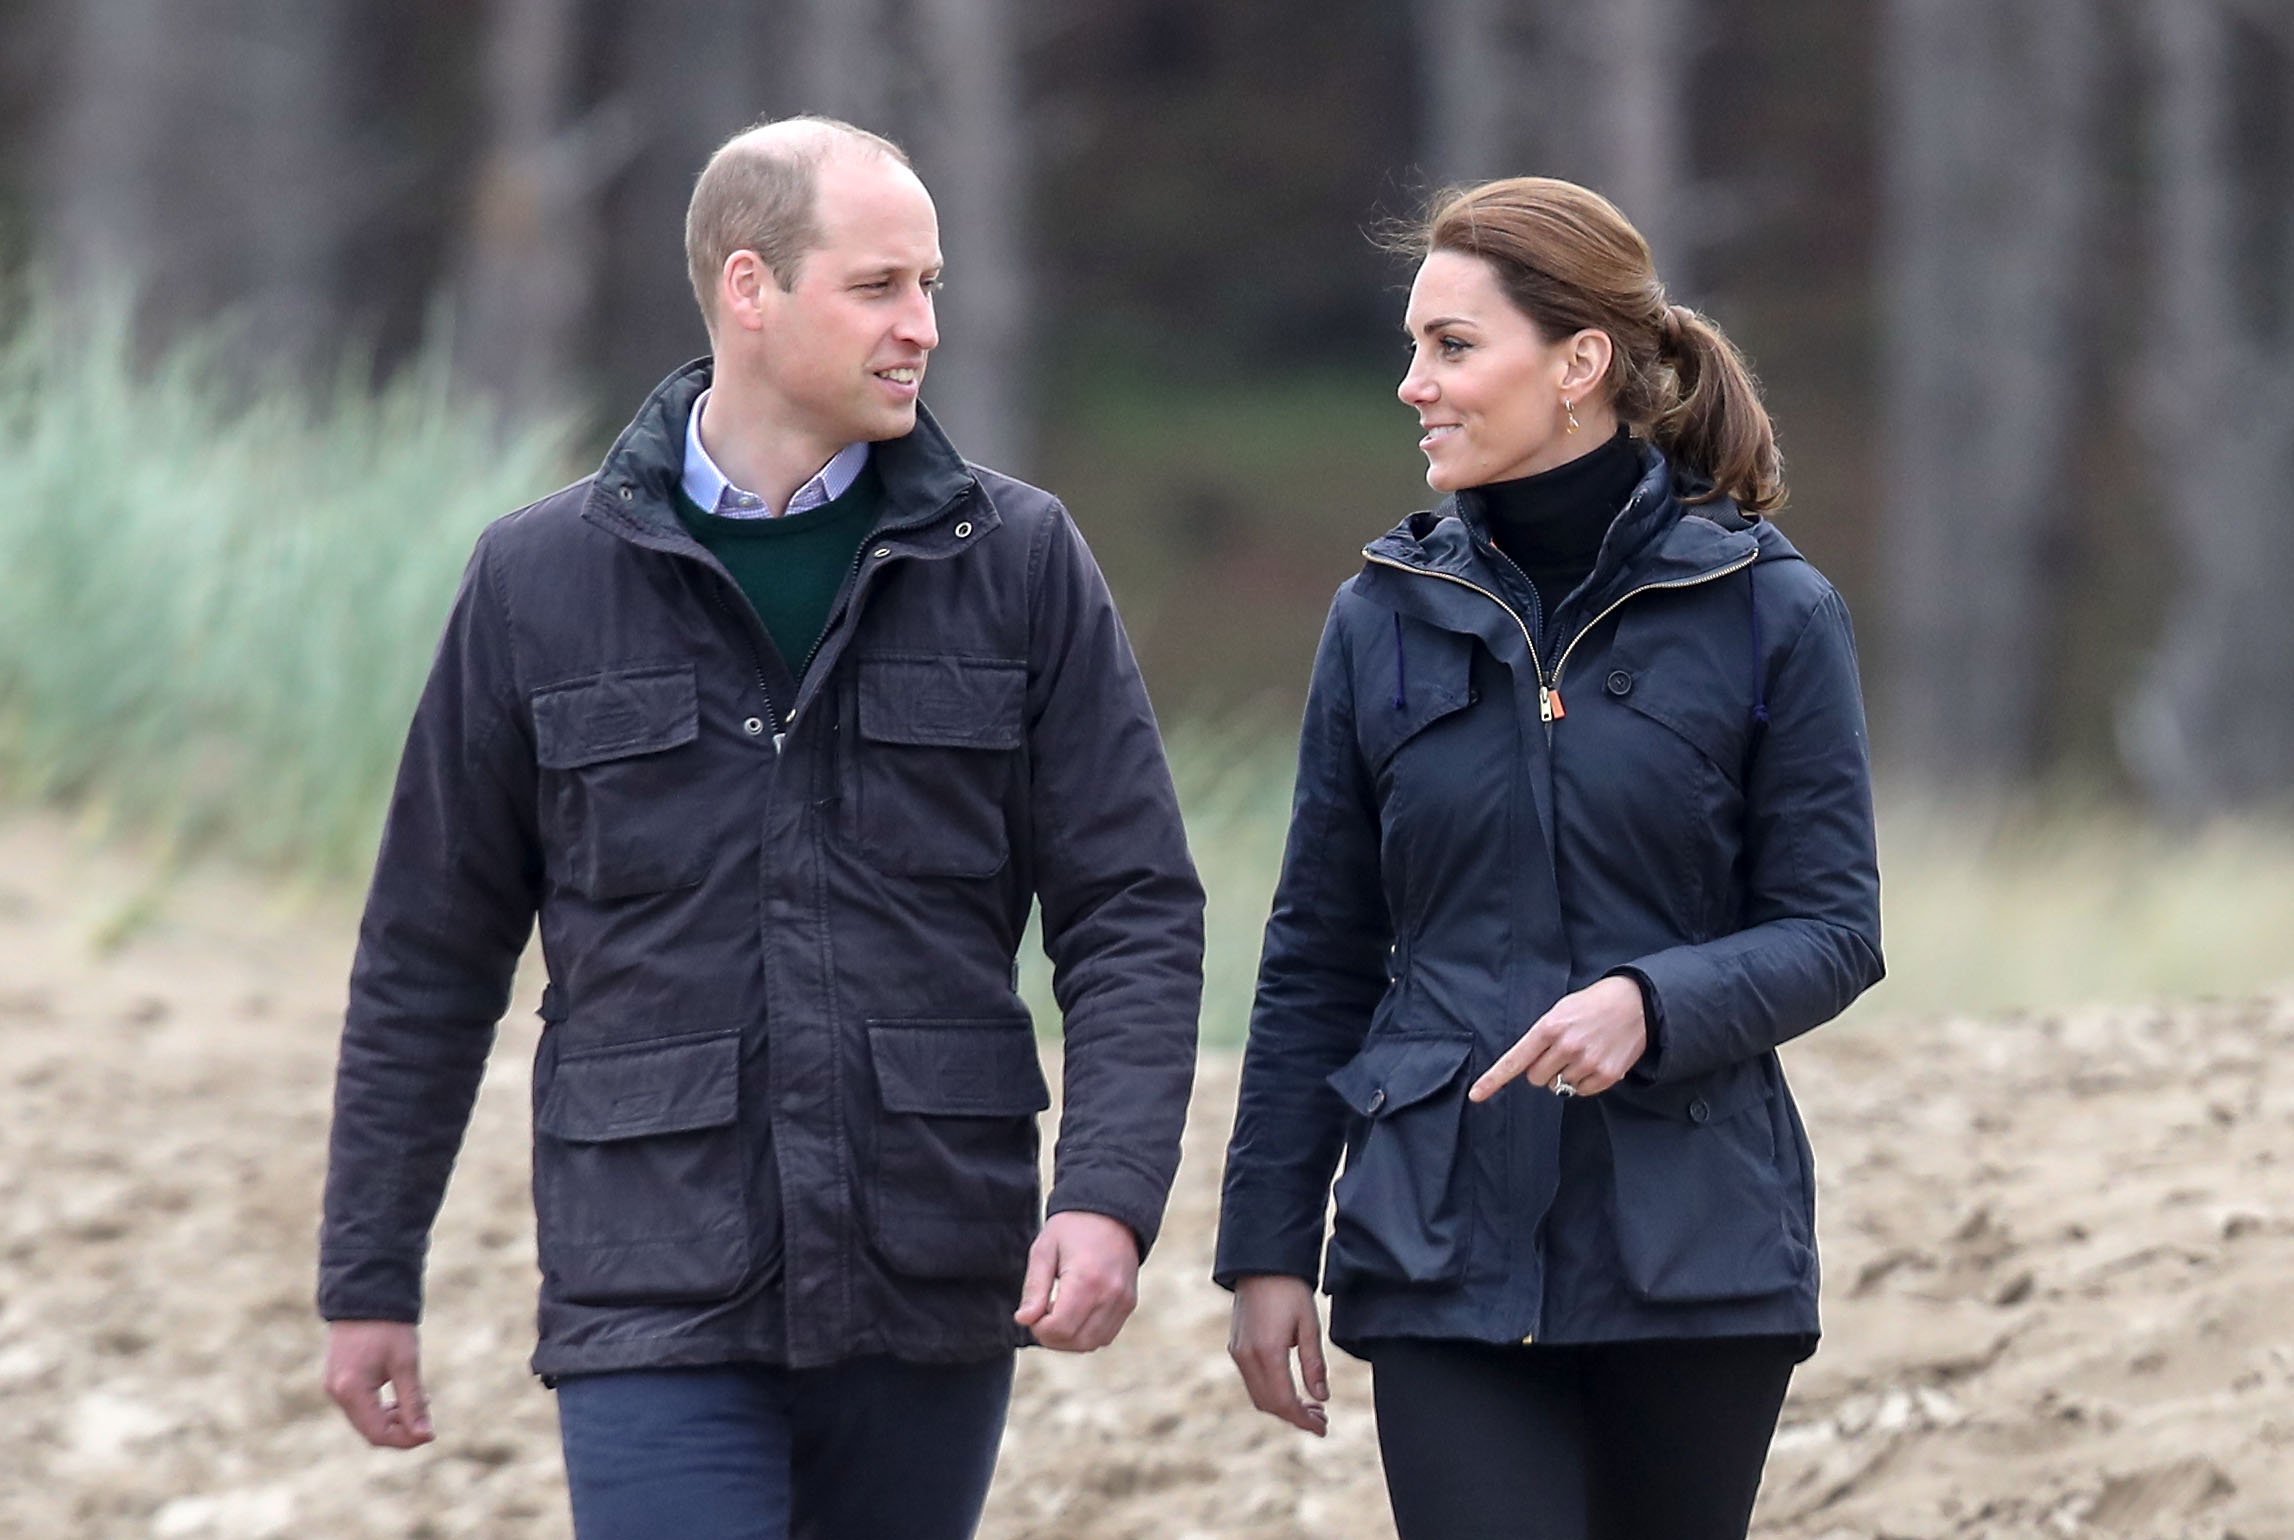 Prince William and Kate Middleton at the Newborough Beach in North Wales on May 8, 2019 | Source: Getty Images